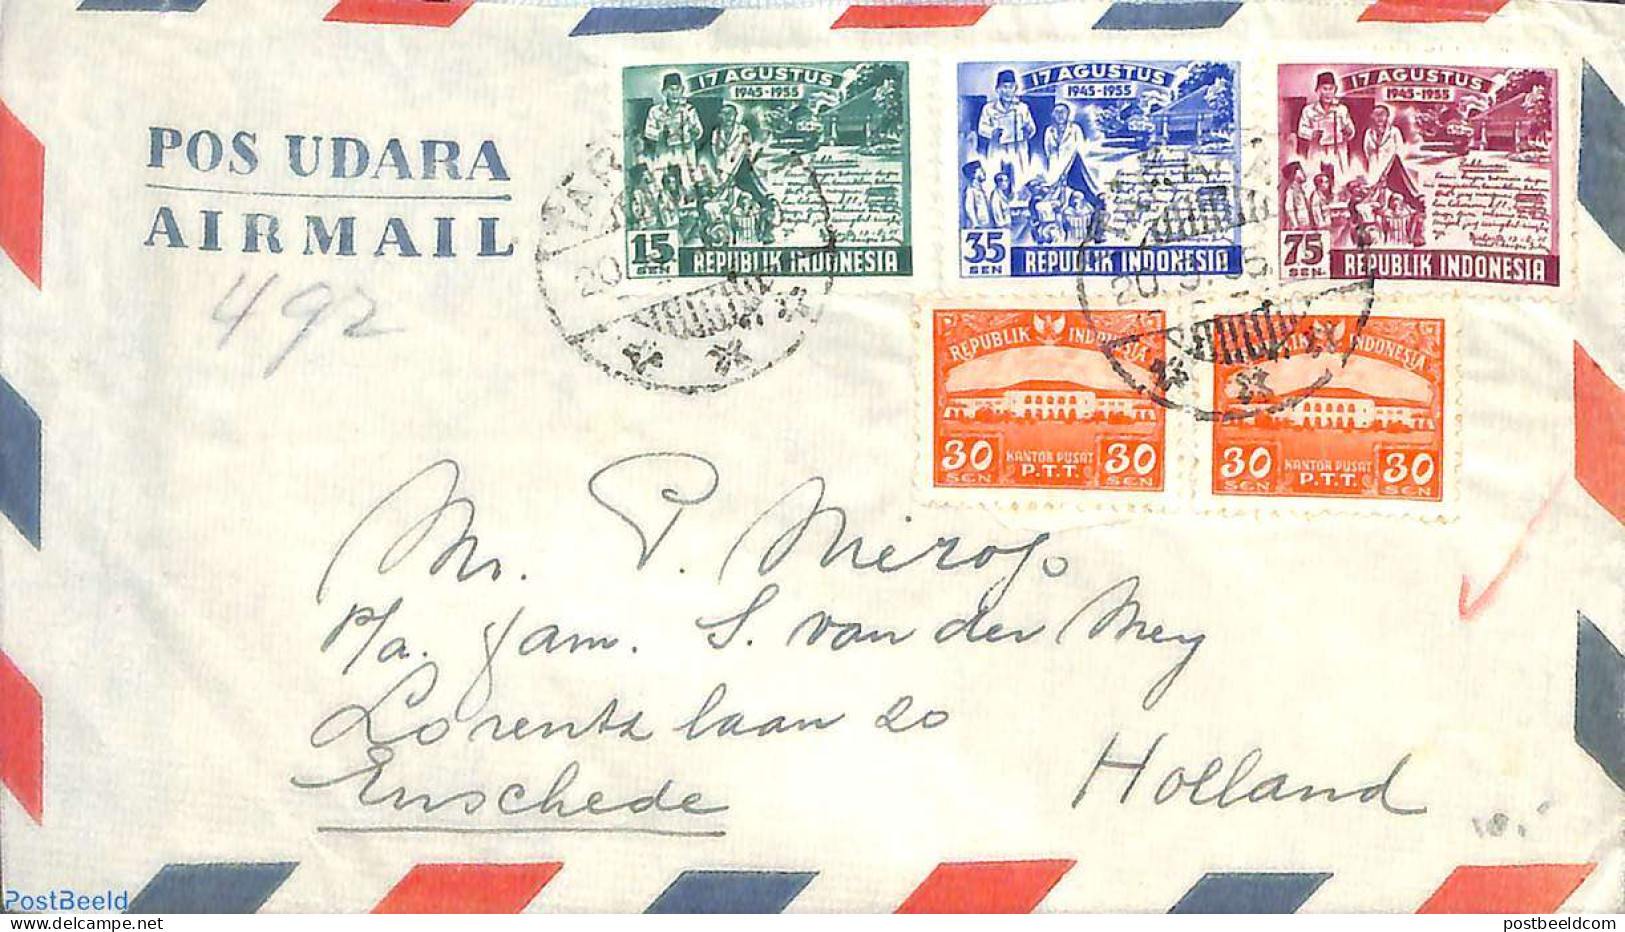 Indonesia 1955 Airmail Letter To Holland, Postal History - Indonesia